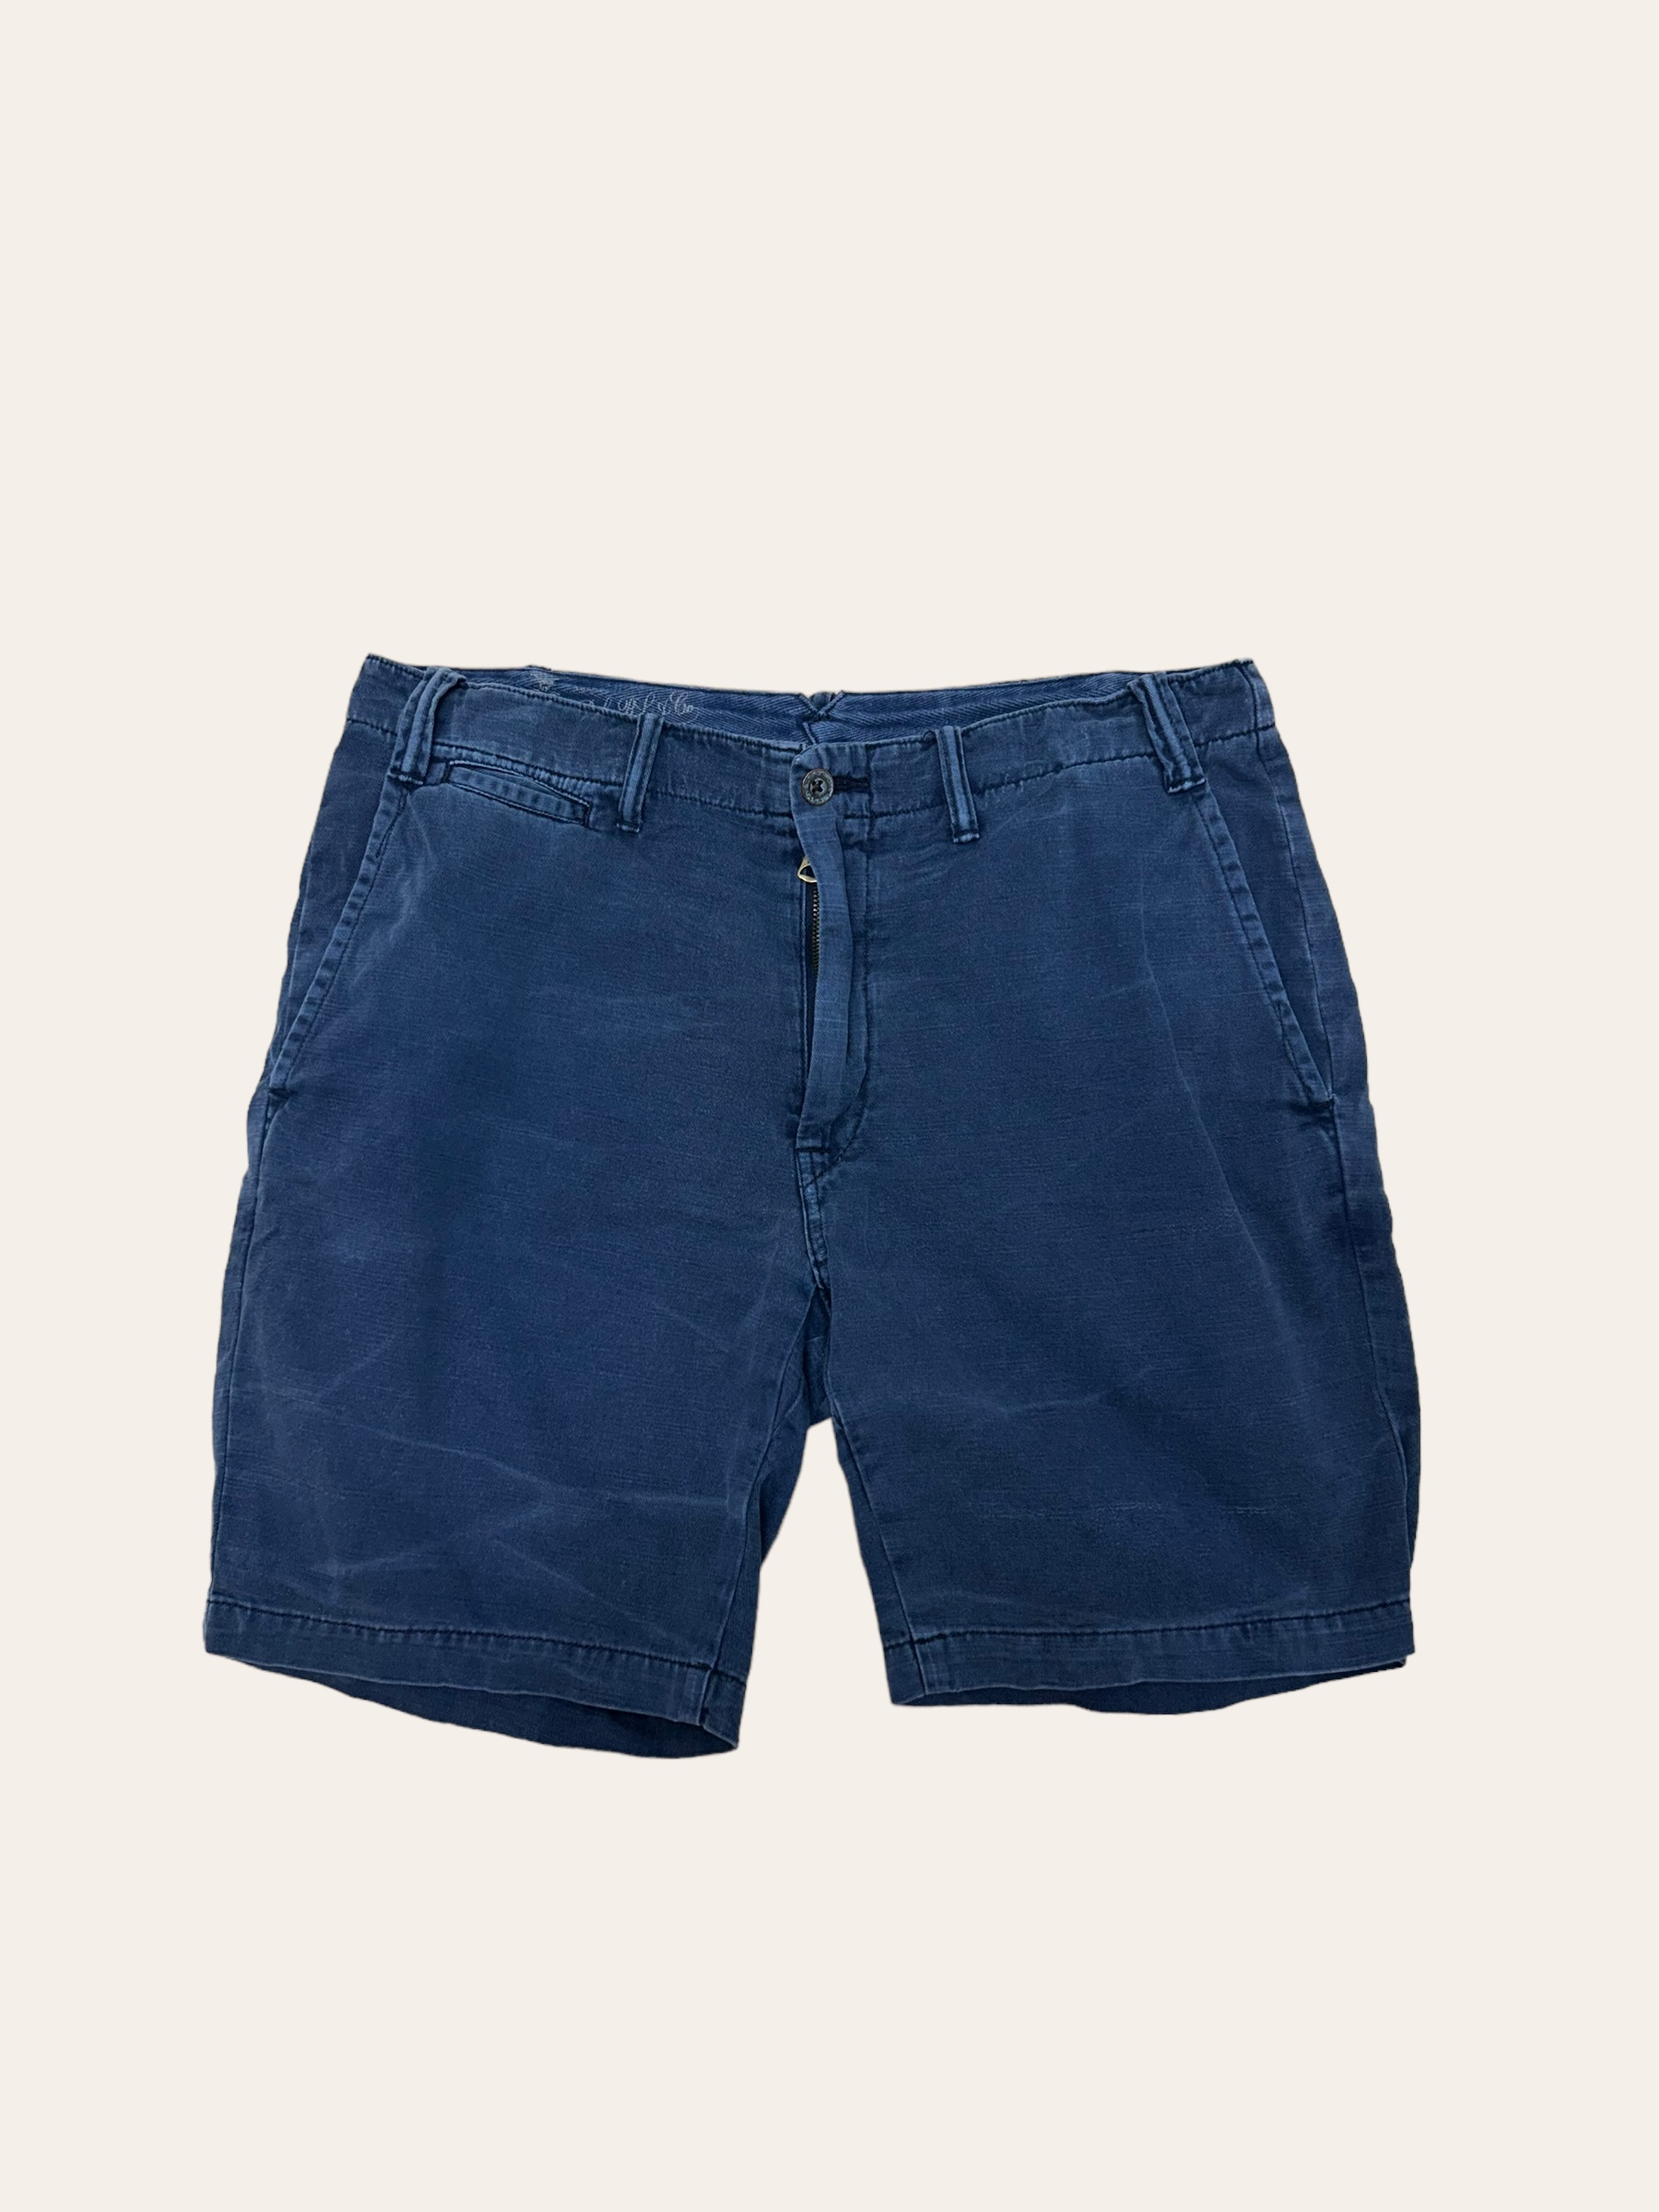 Polo ralph lauren faded blue washed shorts 34